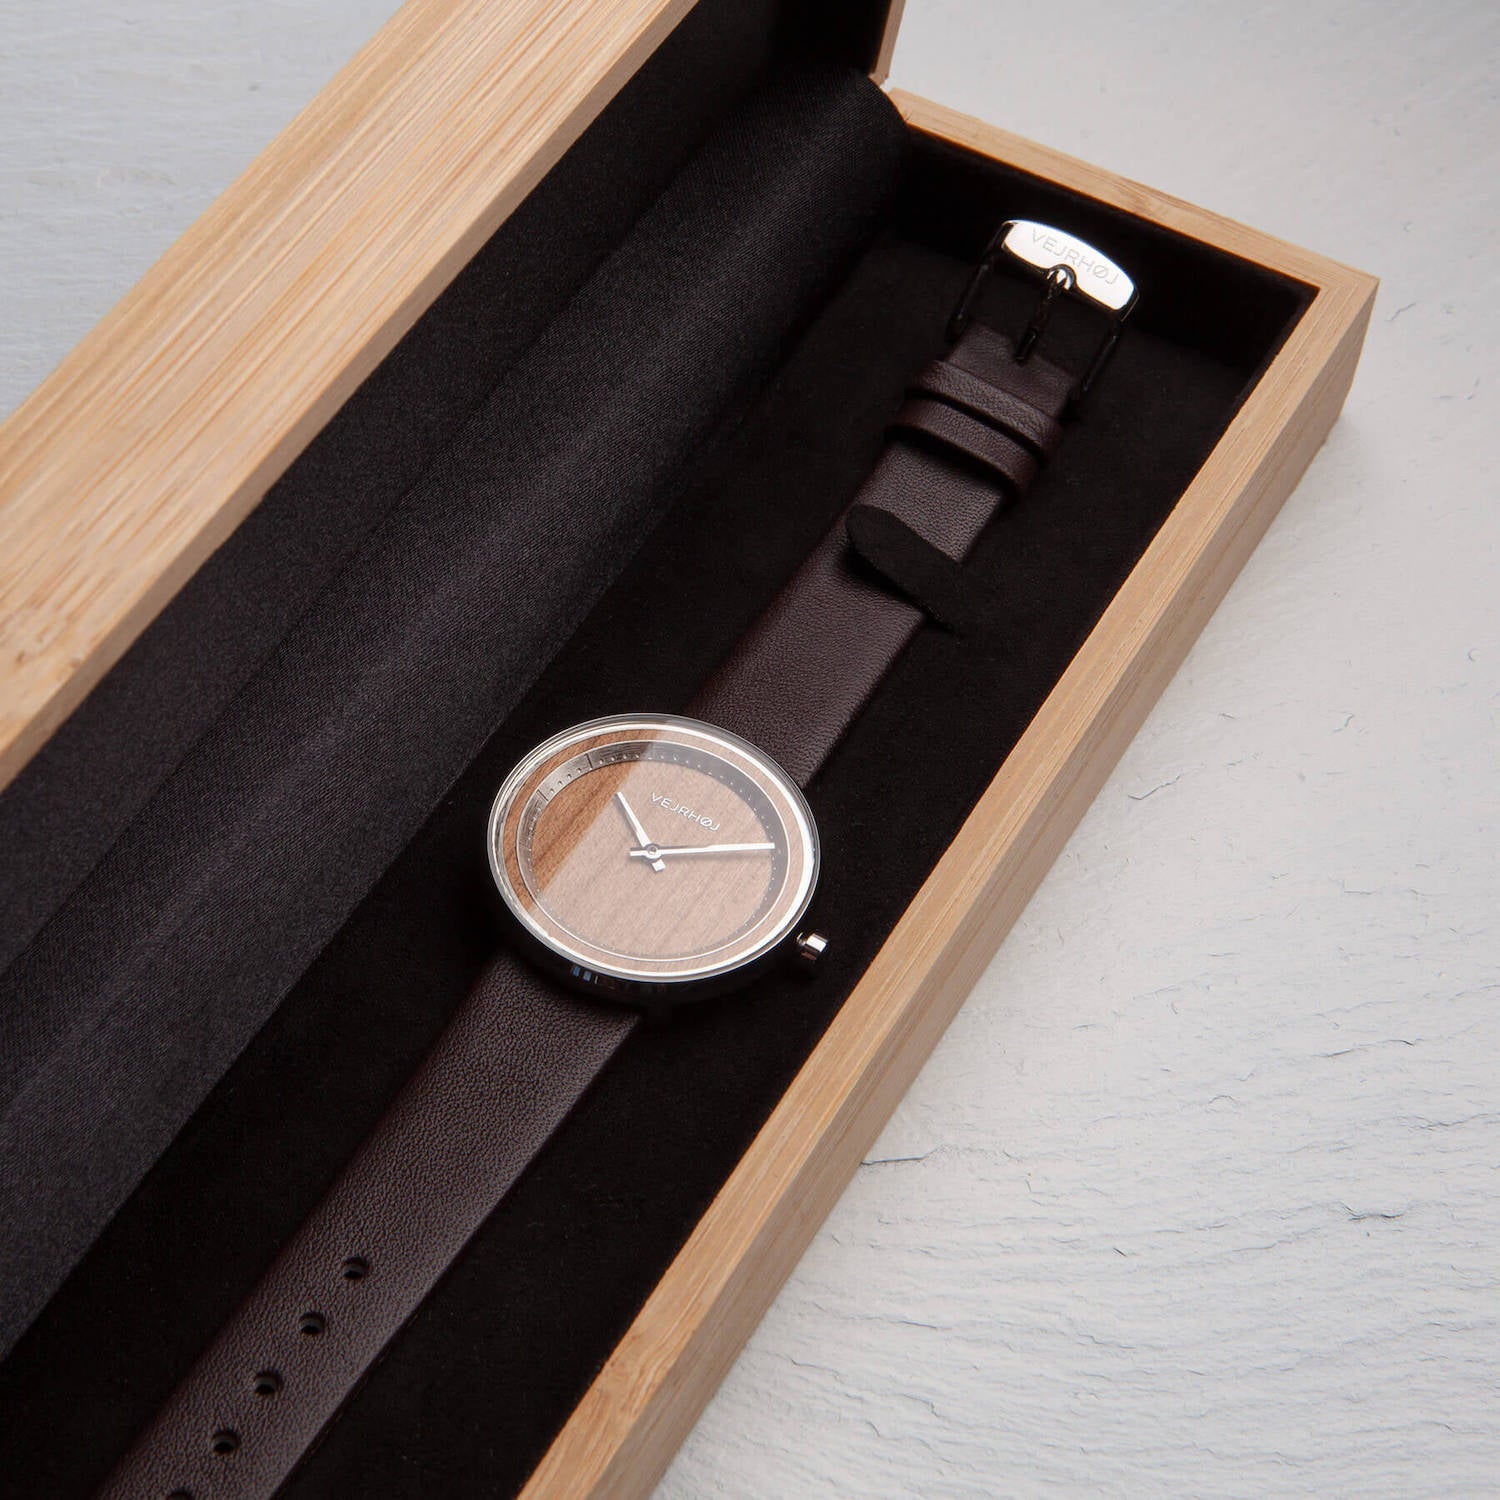 wood watch made from cherry tree for women, placed in wooden box